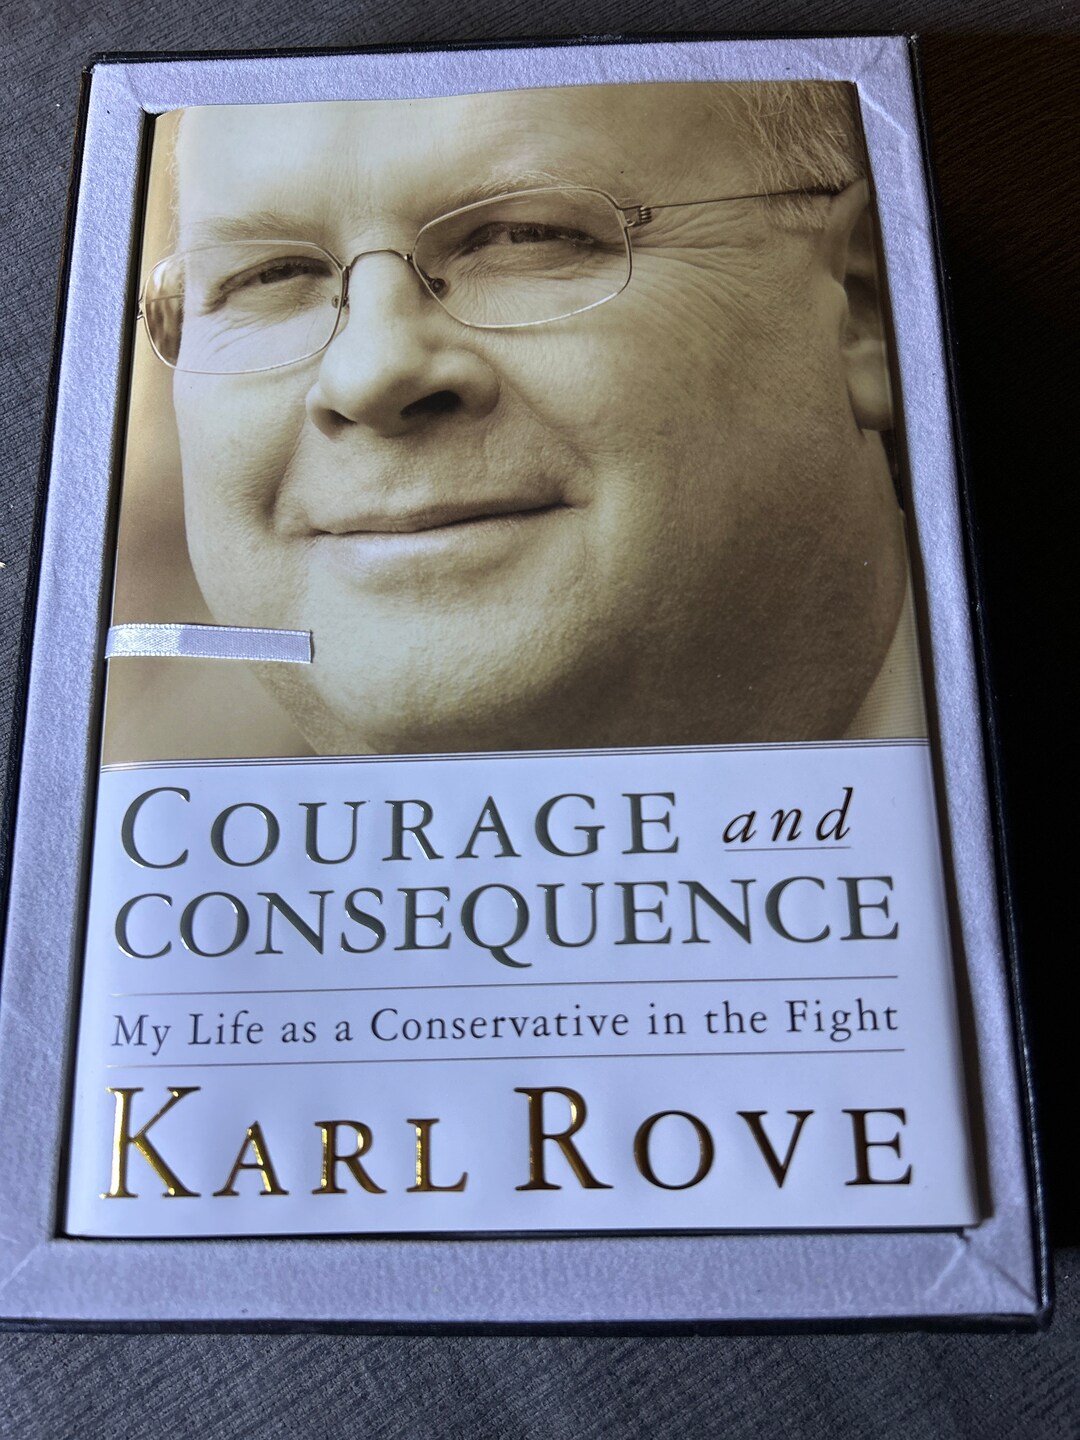 India　Signed　Leather　Online　Rove　courage　Twice　in　and　Consequence　Buy　Etsy　Karl　With